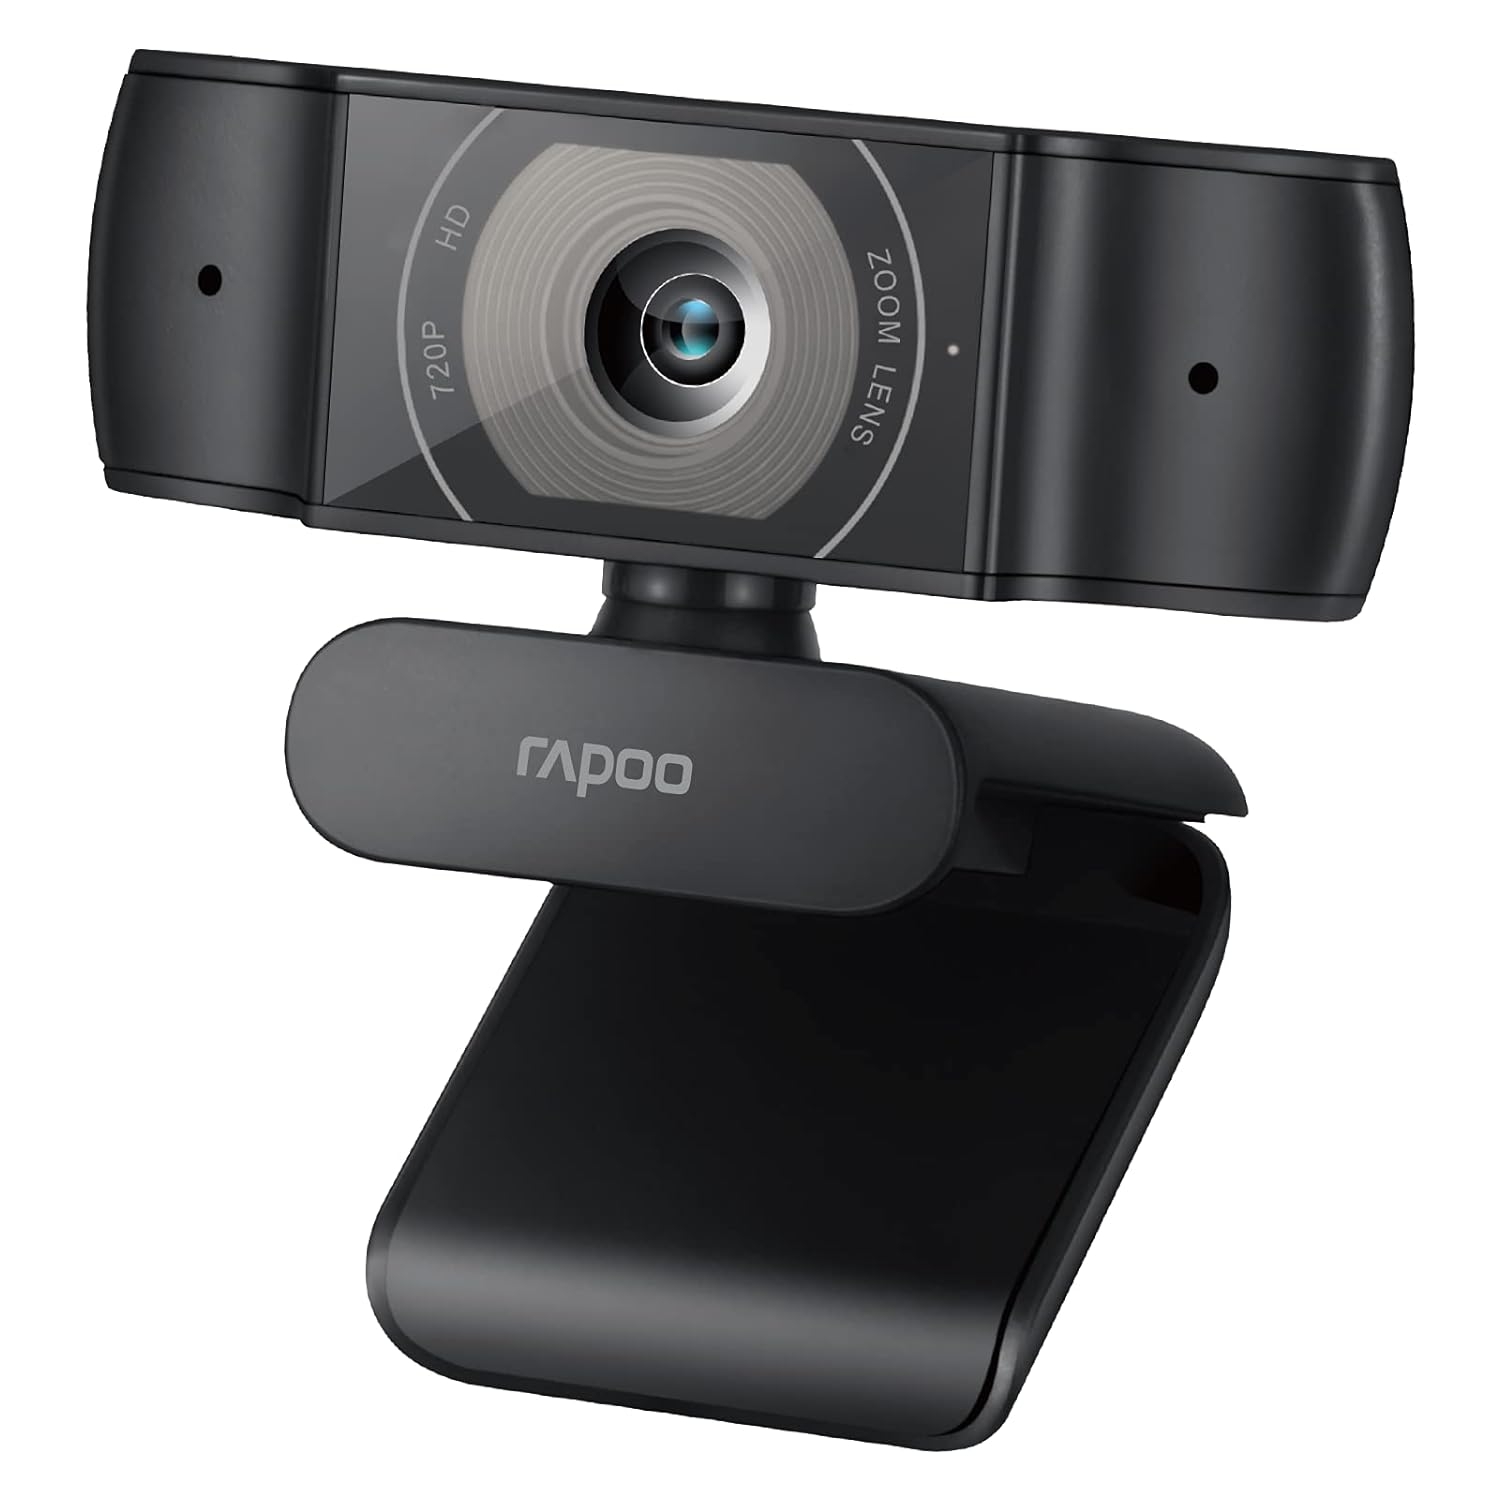 RAPOO C200 Web Camera 720P, HD Webcam with Microphone, Rapoo USB Computer Camera, Built-in Dual Noise Reduction Mics, 100-degree Wide Angle lens, Plug and Play, for Zoom/Skype/Teams, Conferencing and Video Calls